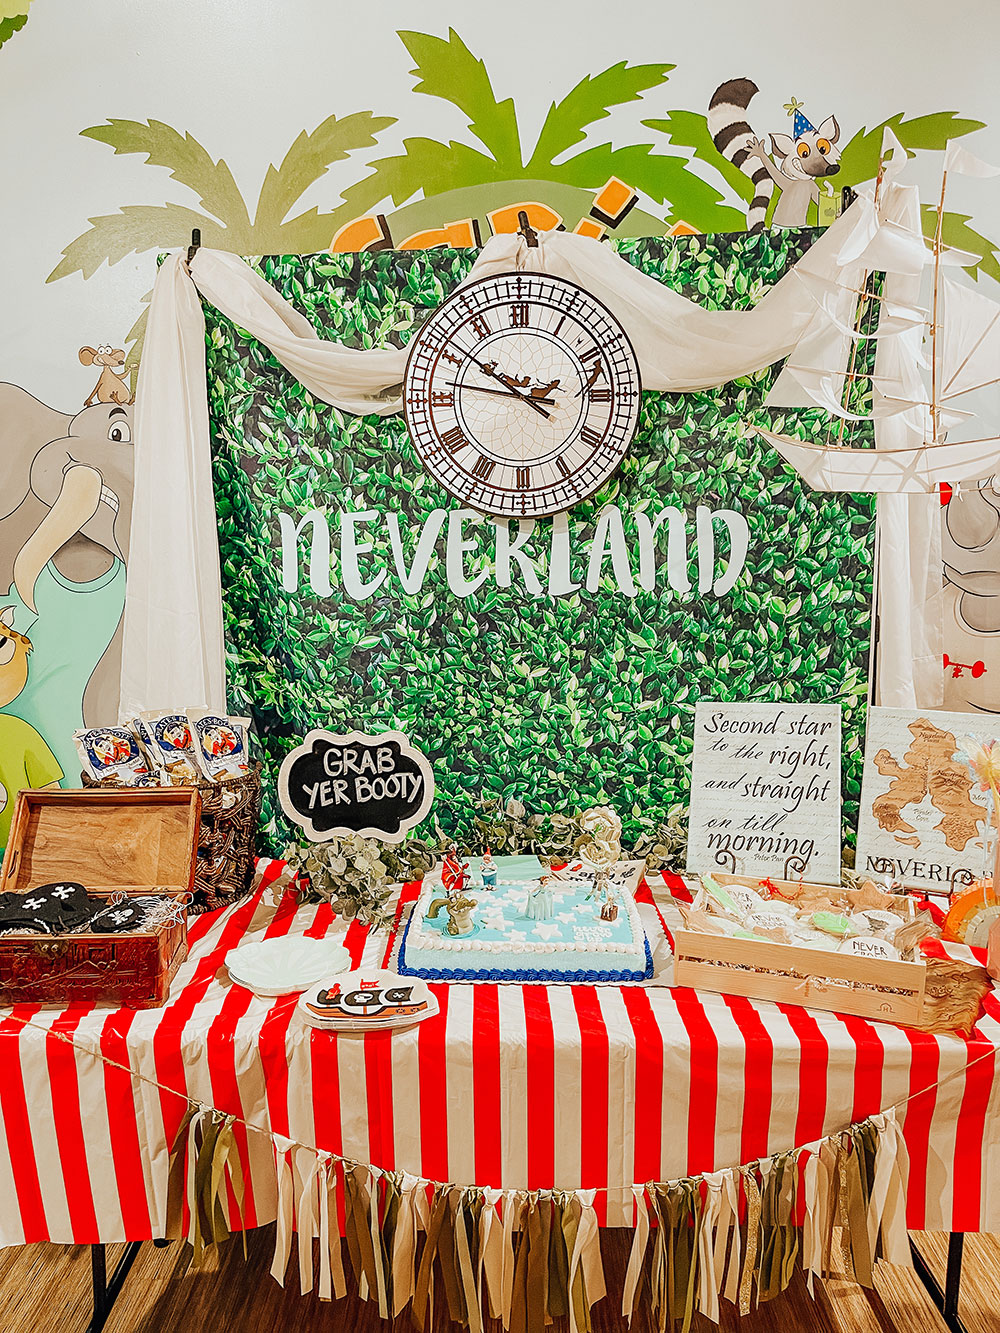 peter pan pirate party decorations - kids birthday party theme ideas